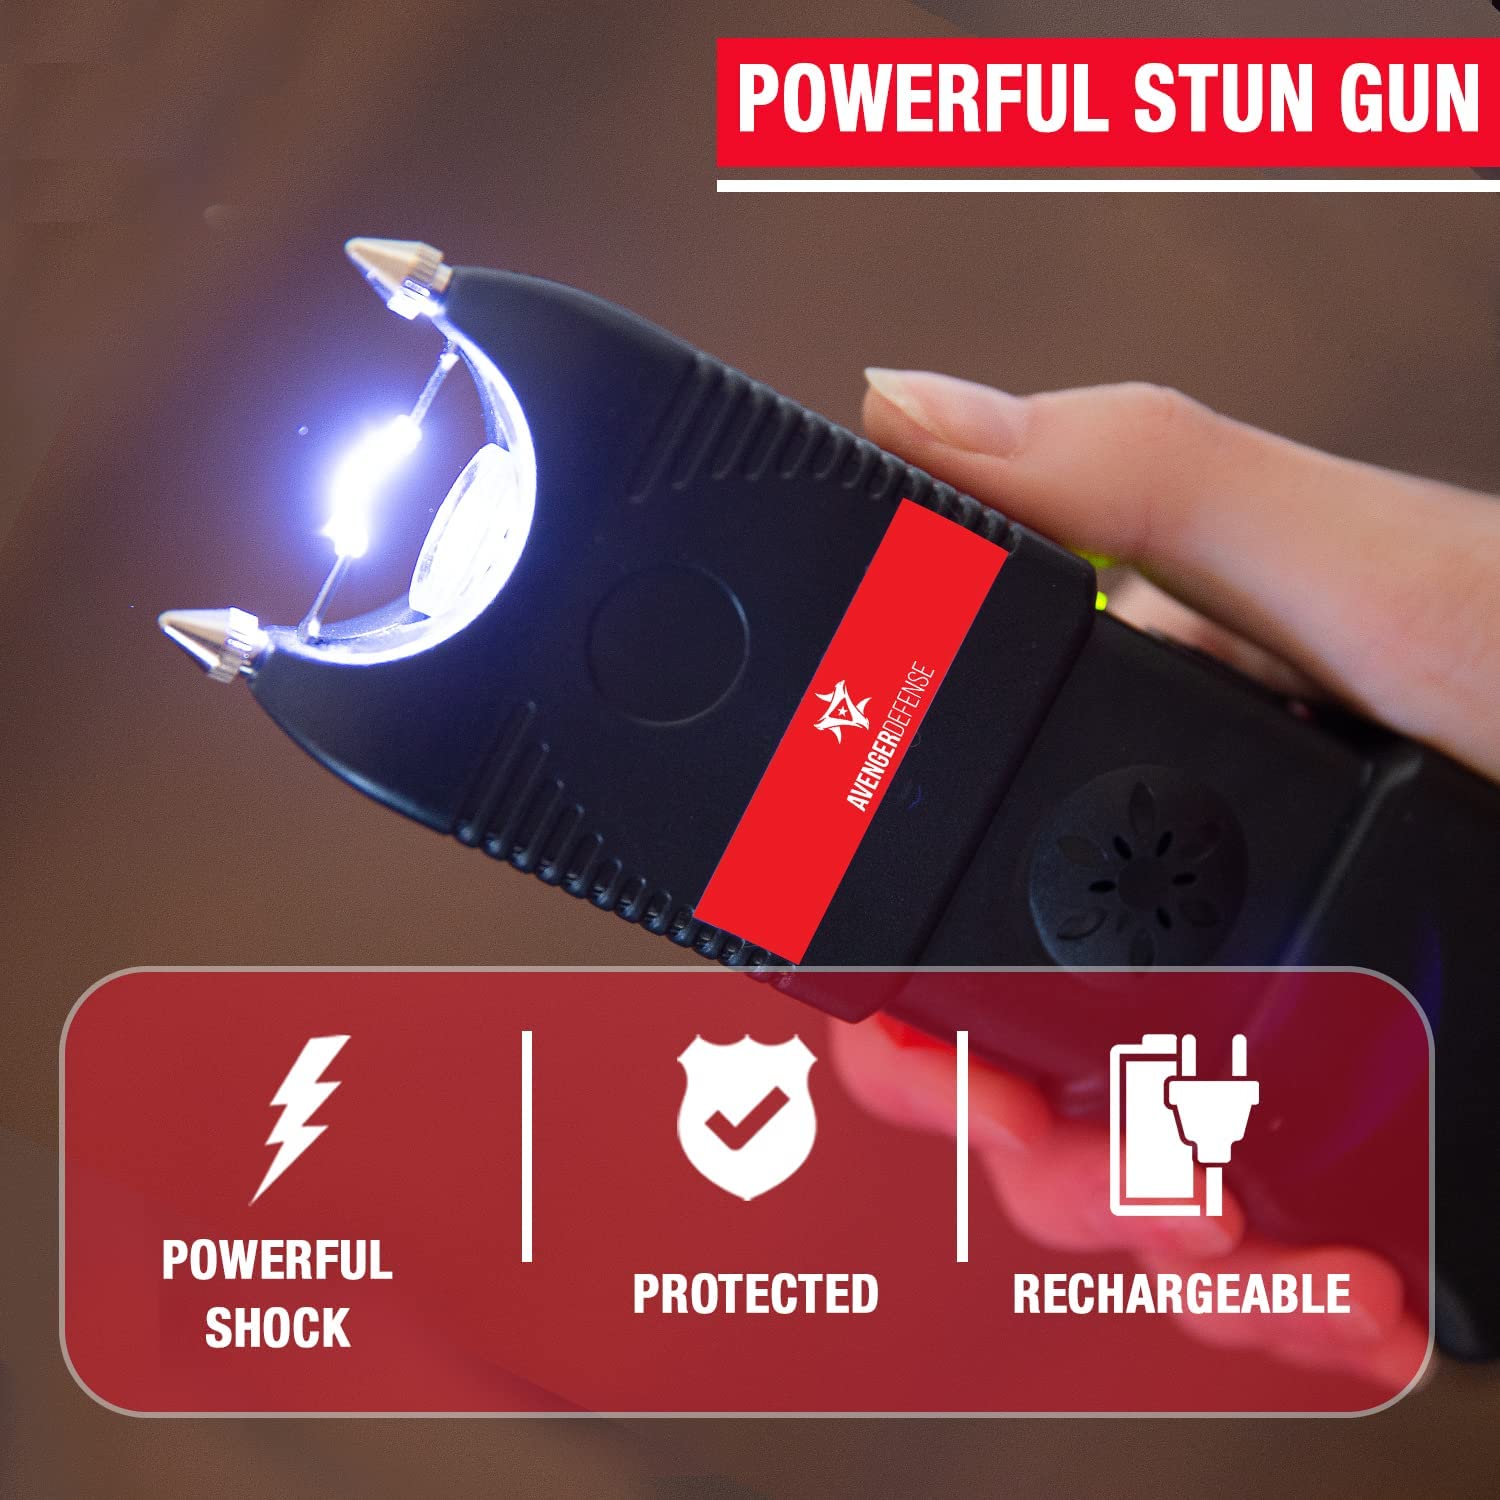 Stun Gun for Self Defense and Protection – Rechargeable, Built-In LED Flashlight and Extremely Loud Alarm